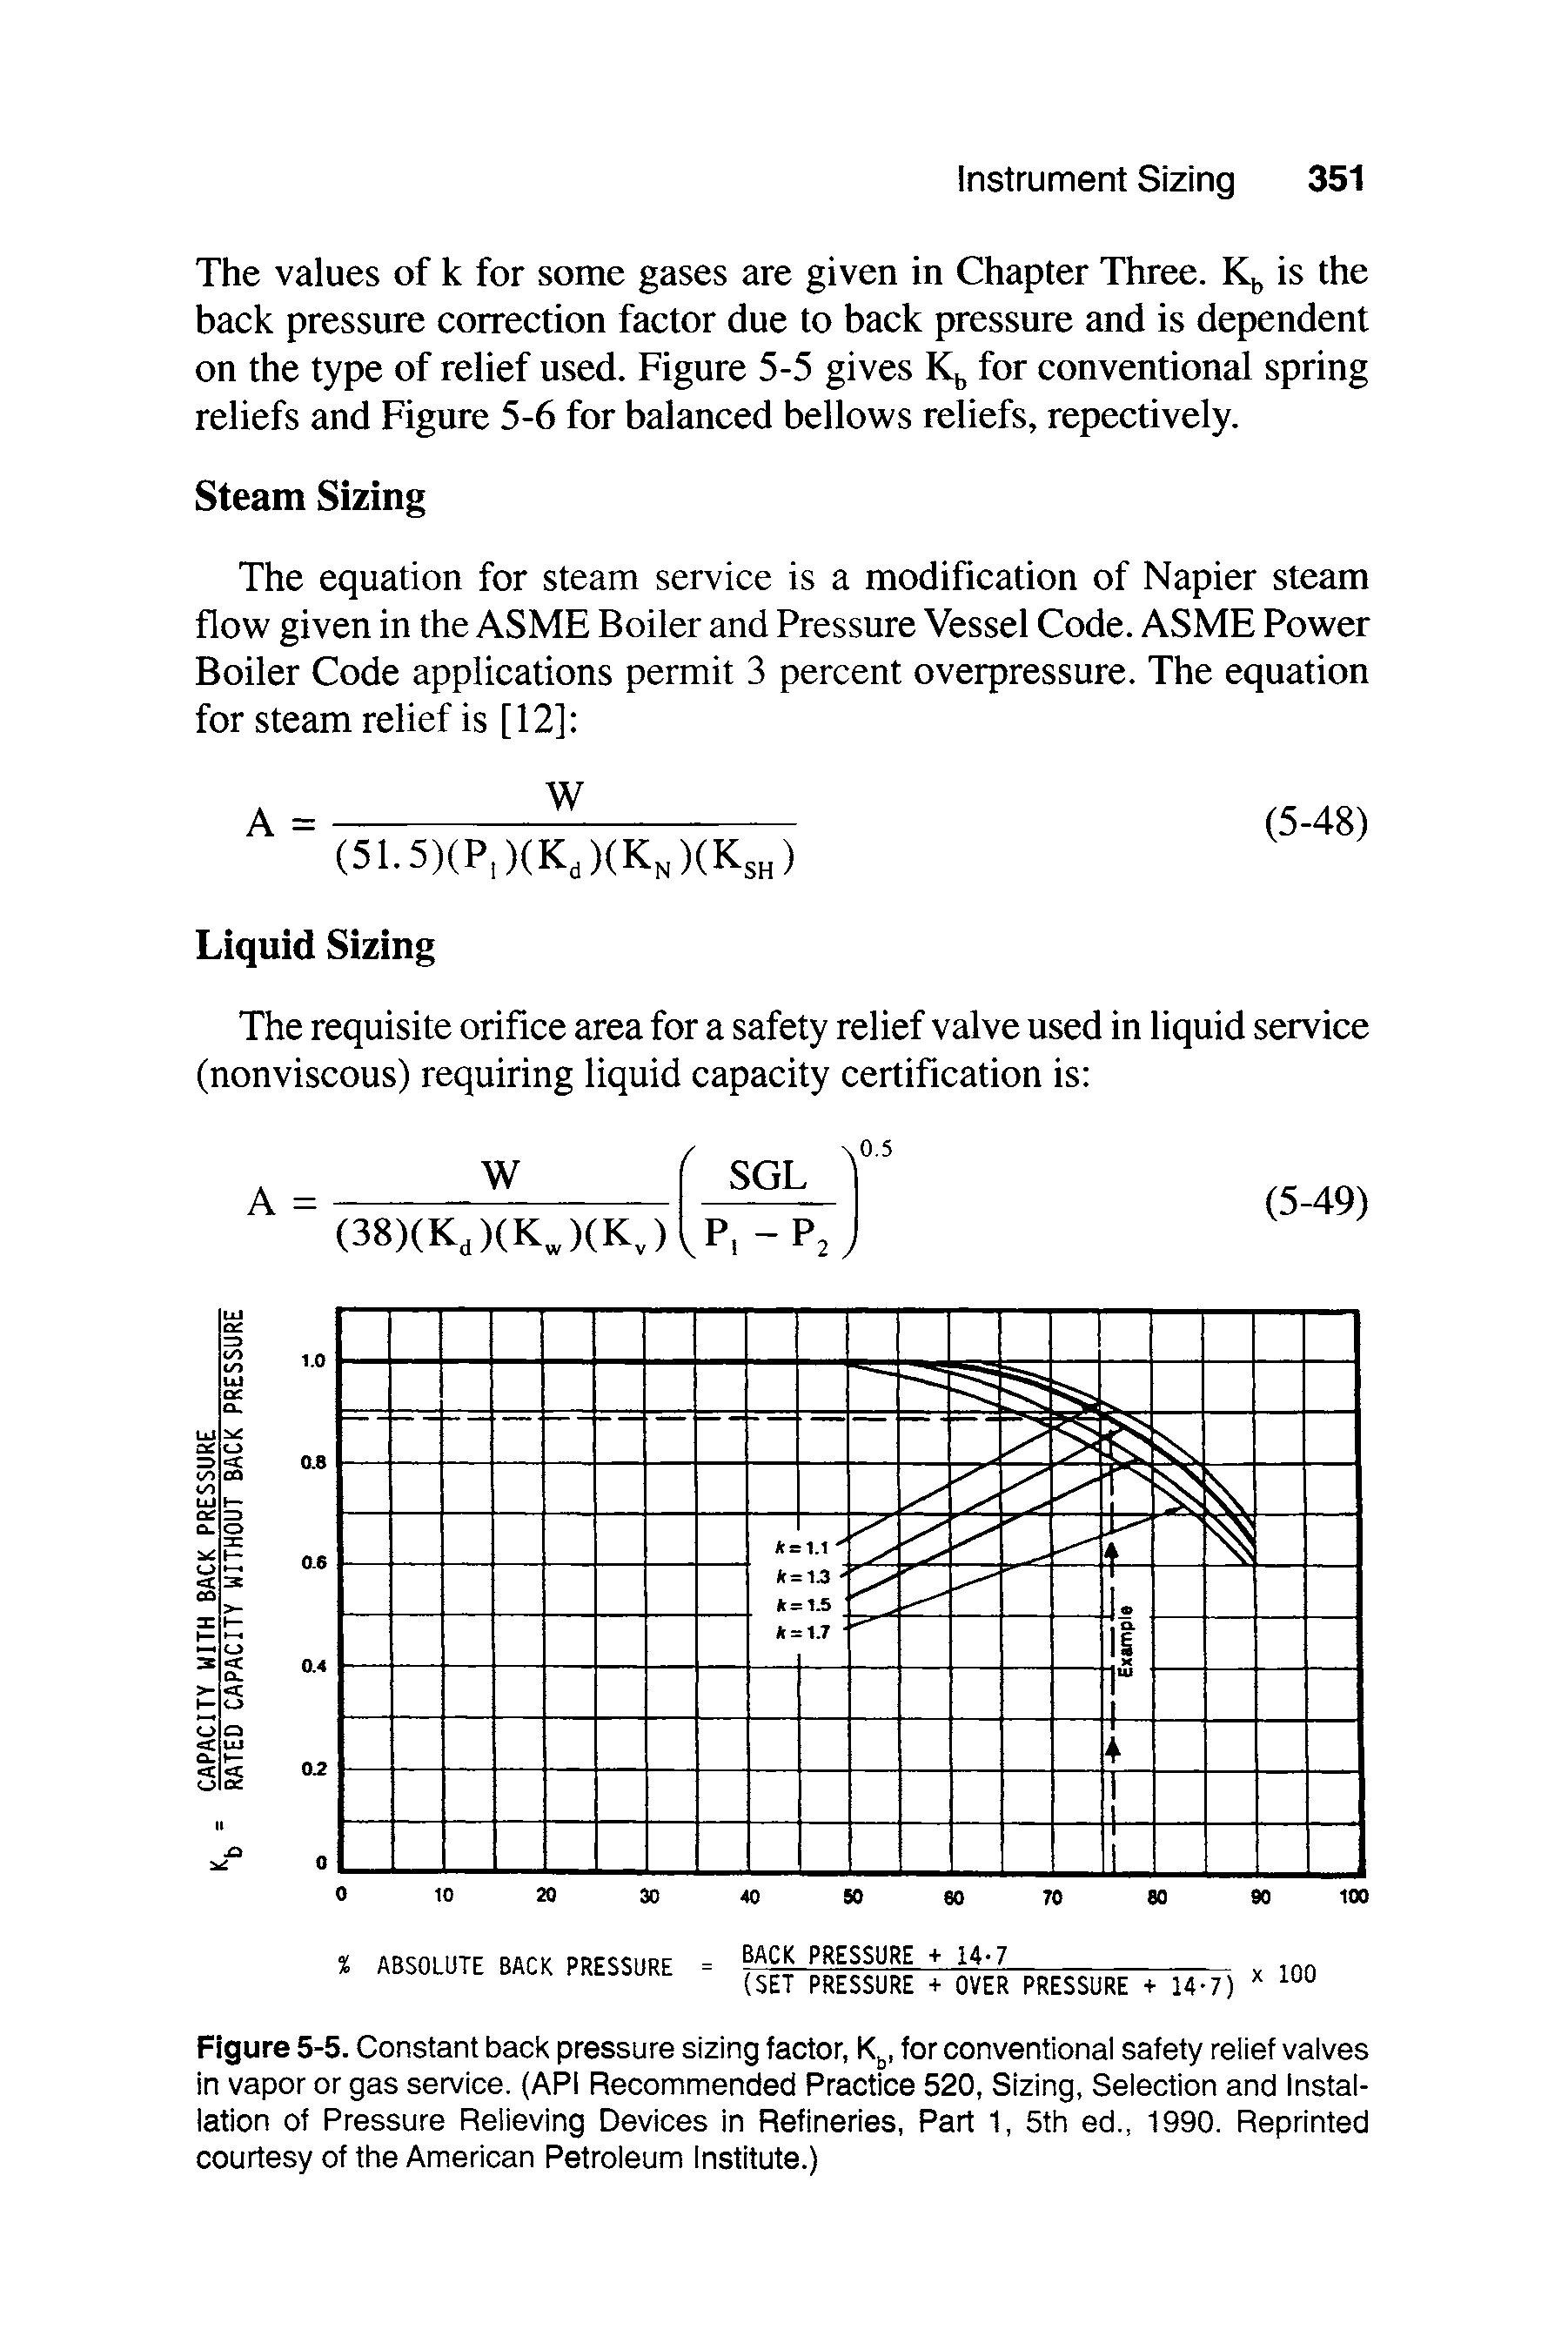 Figure 5-5. Constant back pressure sizing factor, for conventional safety relief valves in vapor or gas service. (API Recommended Practice 520, Sizing, Selection and Installation of Pressure Relieving Devices in Refineries, Part 1, 5th ed., 1990. Reprinted courtesy of the American Petroleum Institute.)...